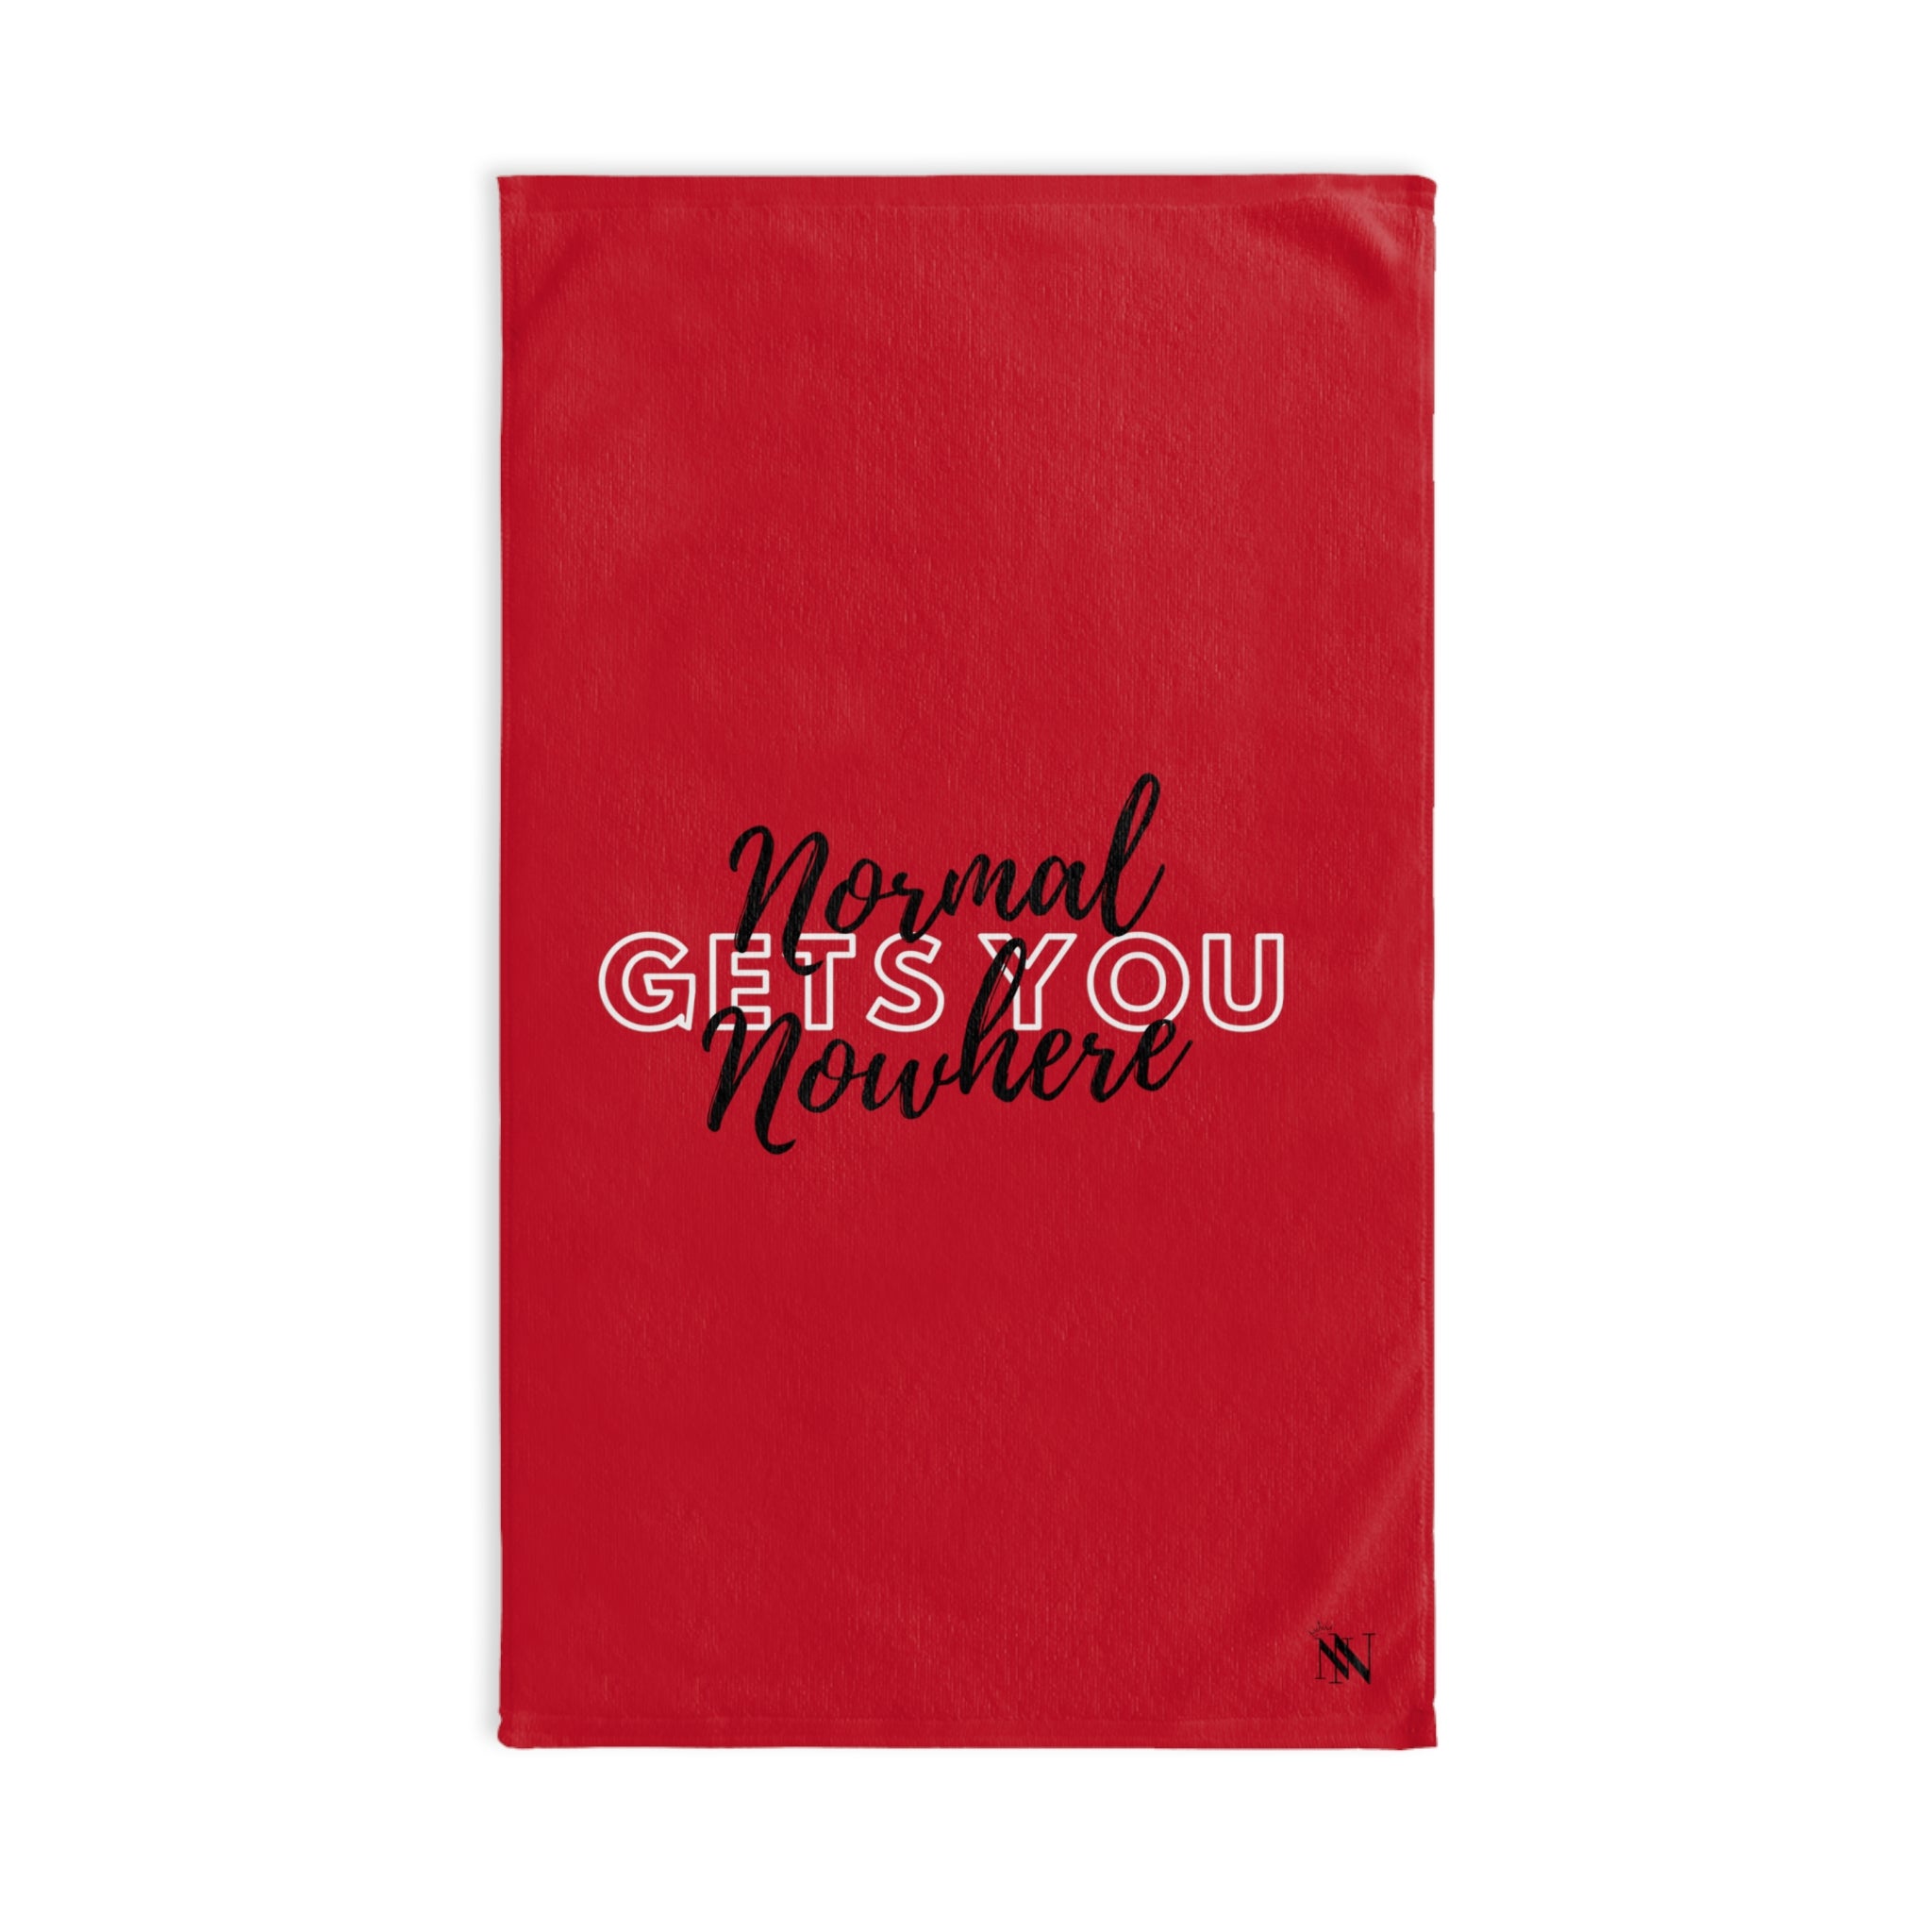 Normal Nowhere Red | Sexy Gifts for Boyfriend, Funny Towel Romantic Gift for Wedding Couple Fiance First Year 2nd Anniversary Valentines, Party Gag Gifts, Joke Humor Cloth for Husband Men BF NECTAR NAPKINS